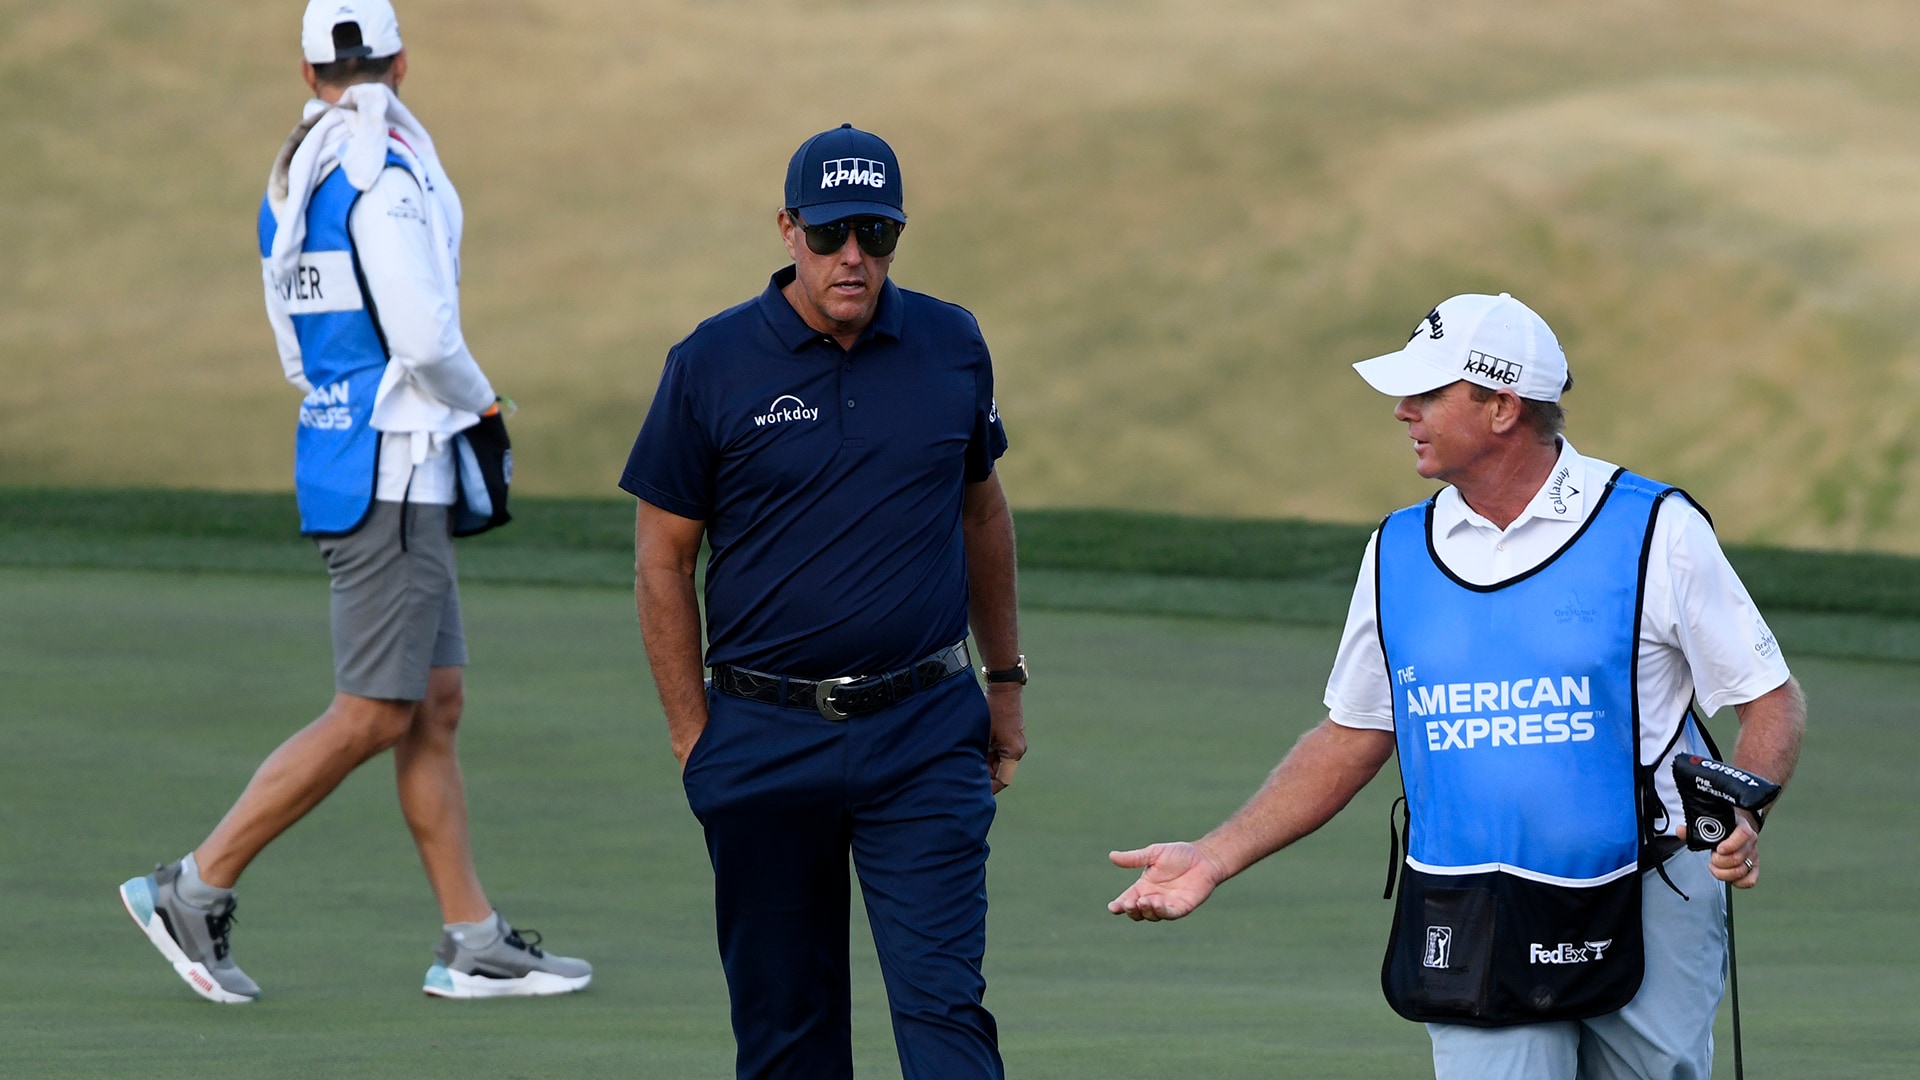 Phil Mickelson did something Friday that he’d never done on the PGA Tour